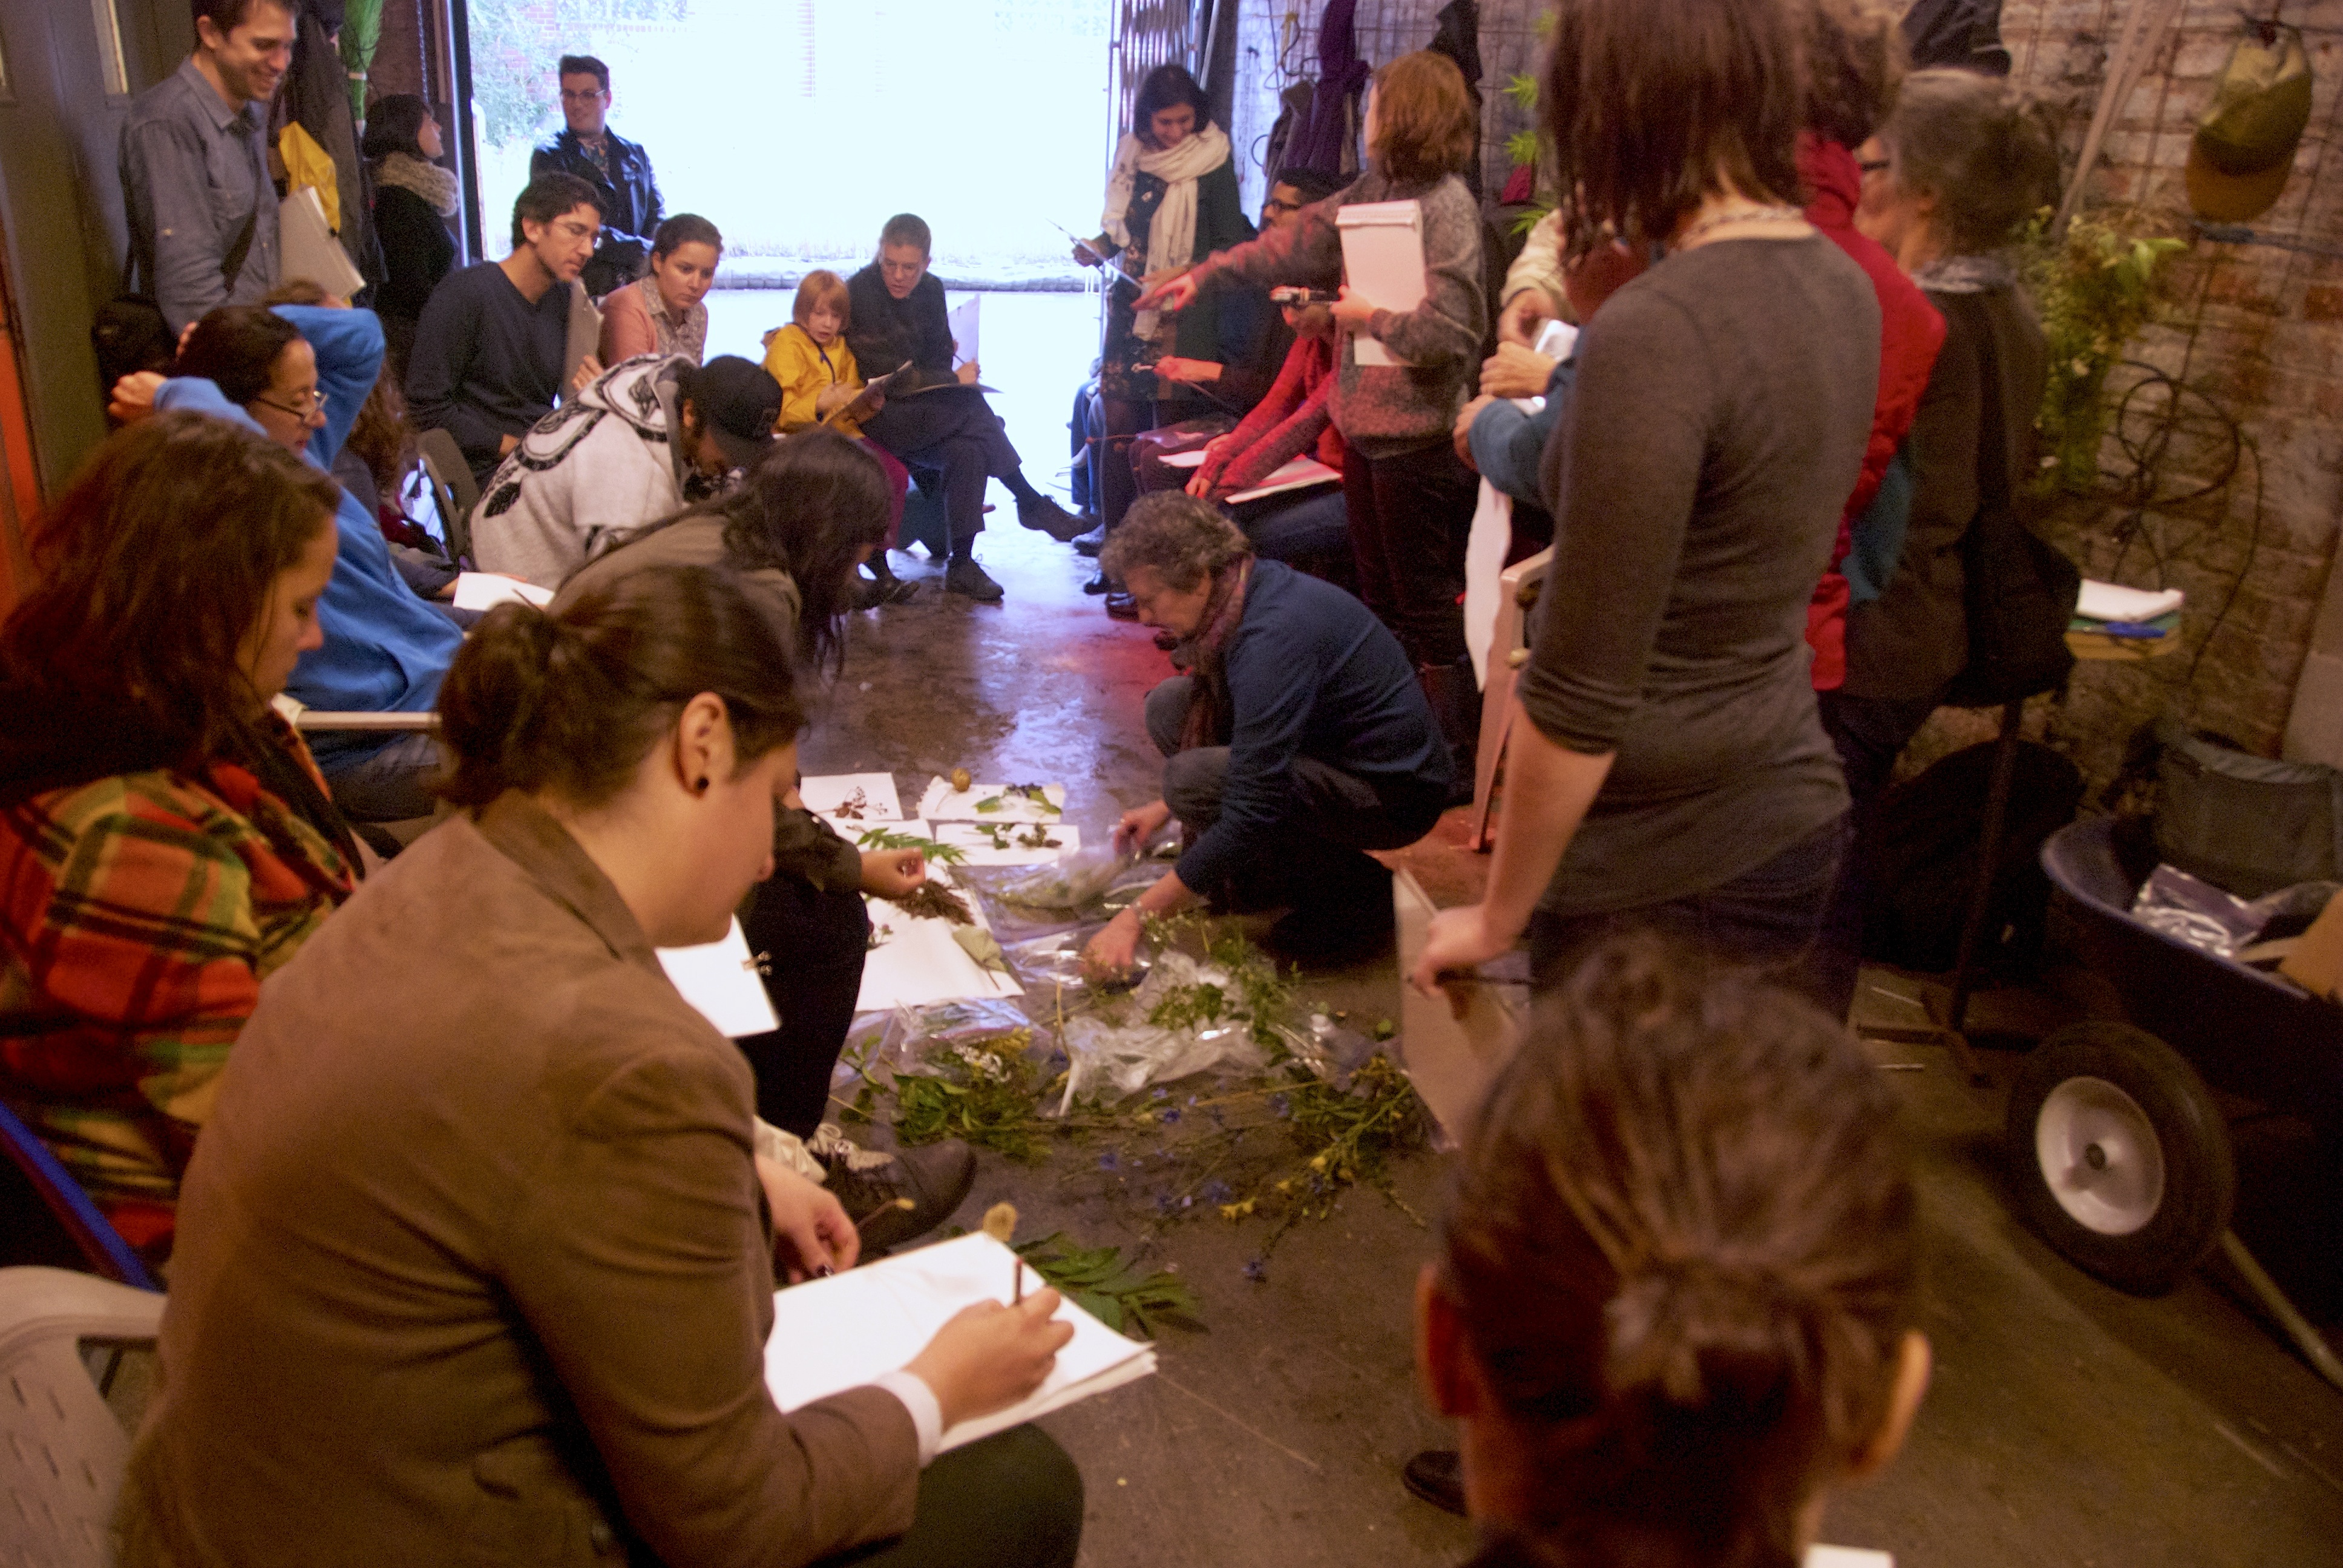 [Image 24 - Jessie Hart leads the drawing phase of the Urban greening lab, 13 September 2014. Photo: S. Janssen]